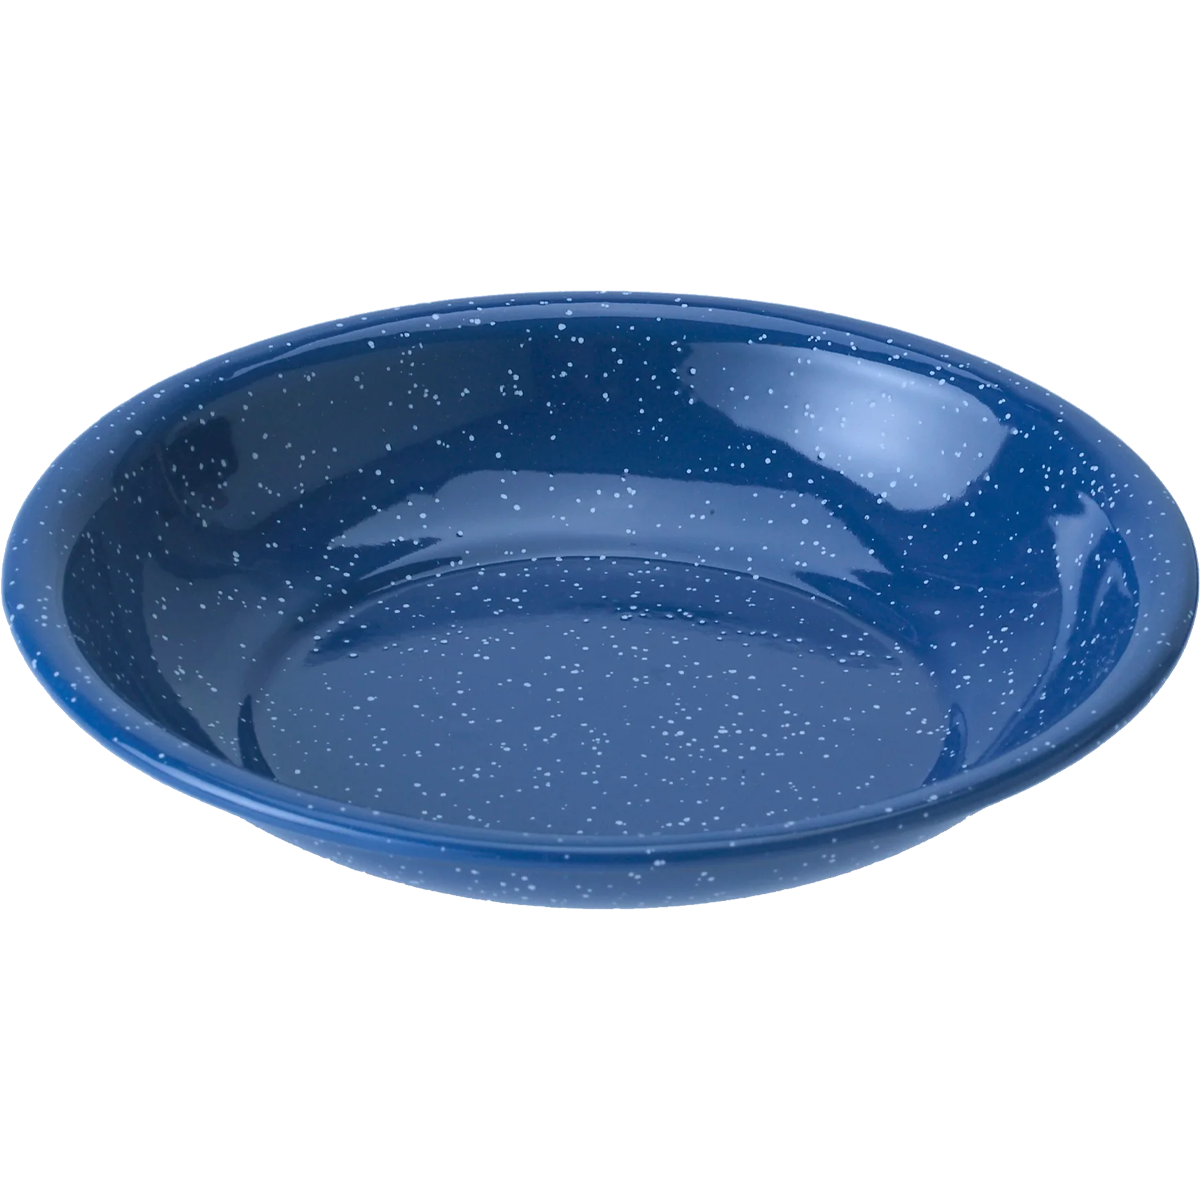 Cereal Bowl alternate view